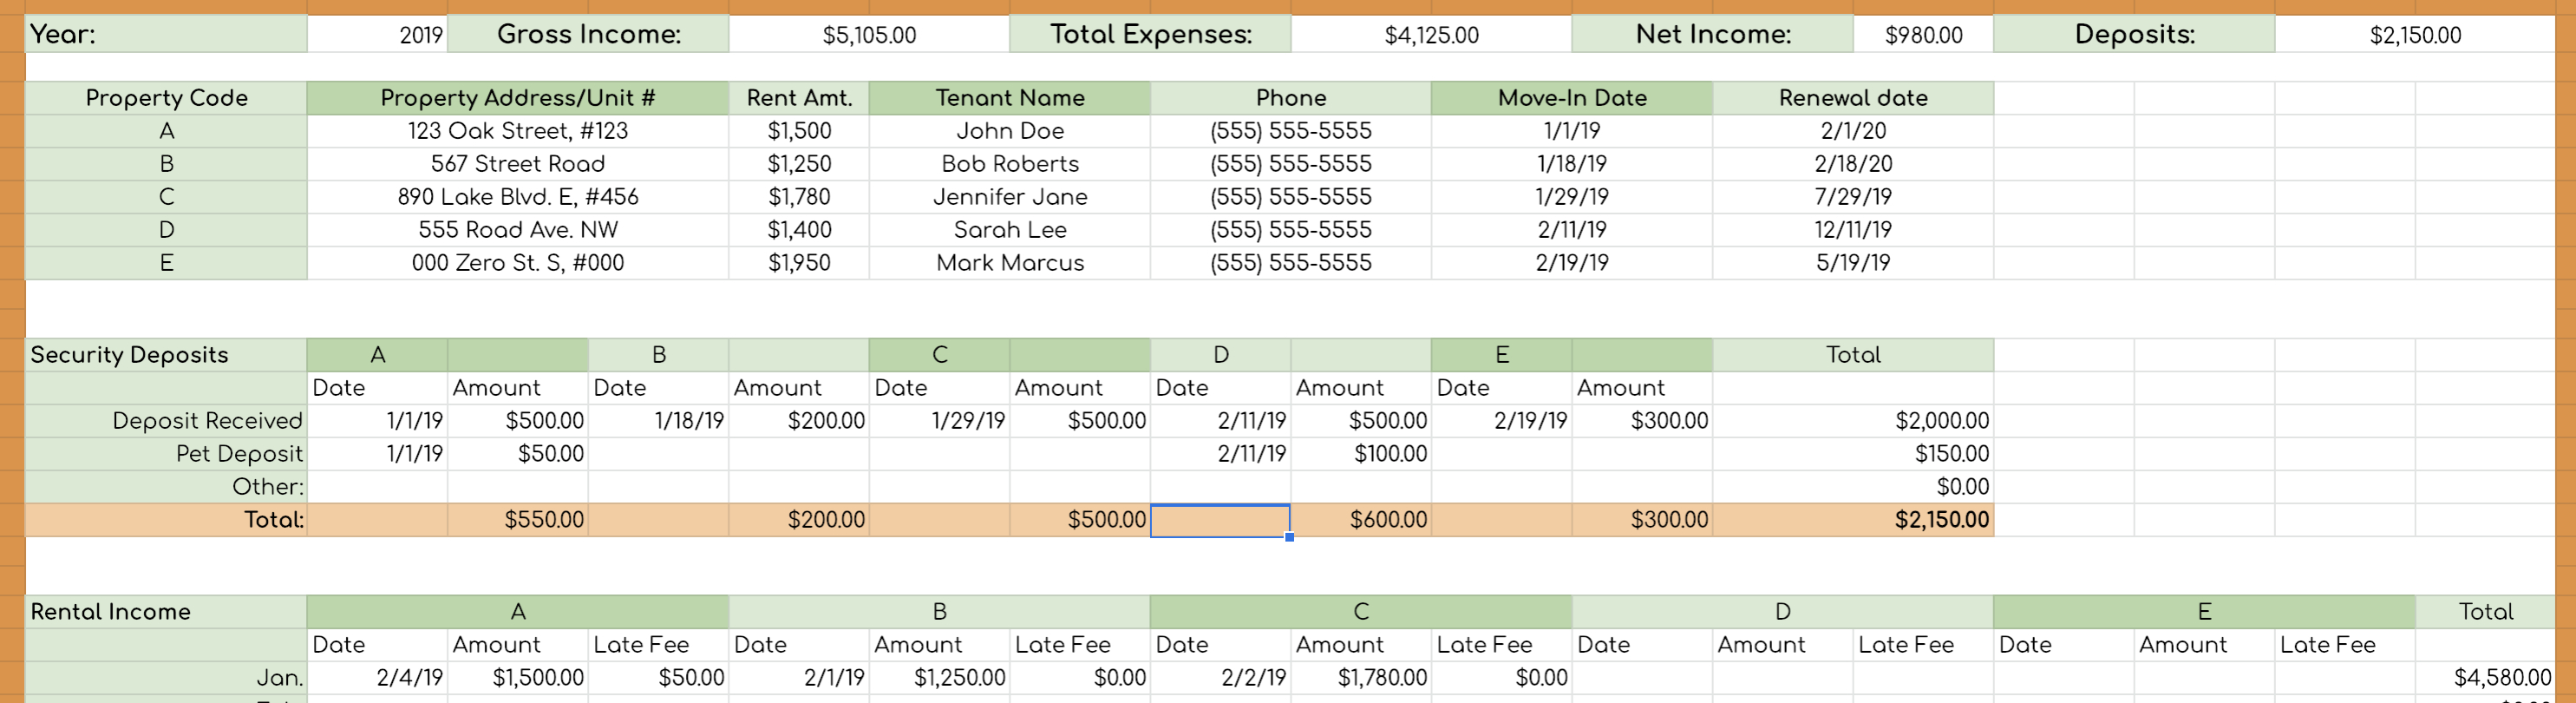 Rental Income And Expense Worksheet  Propertymanagement Within Rental Income And Expense Worksheet